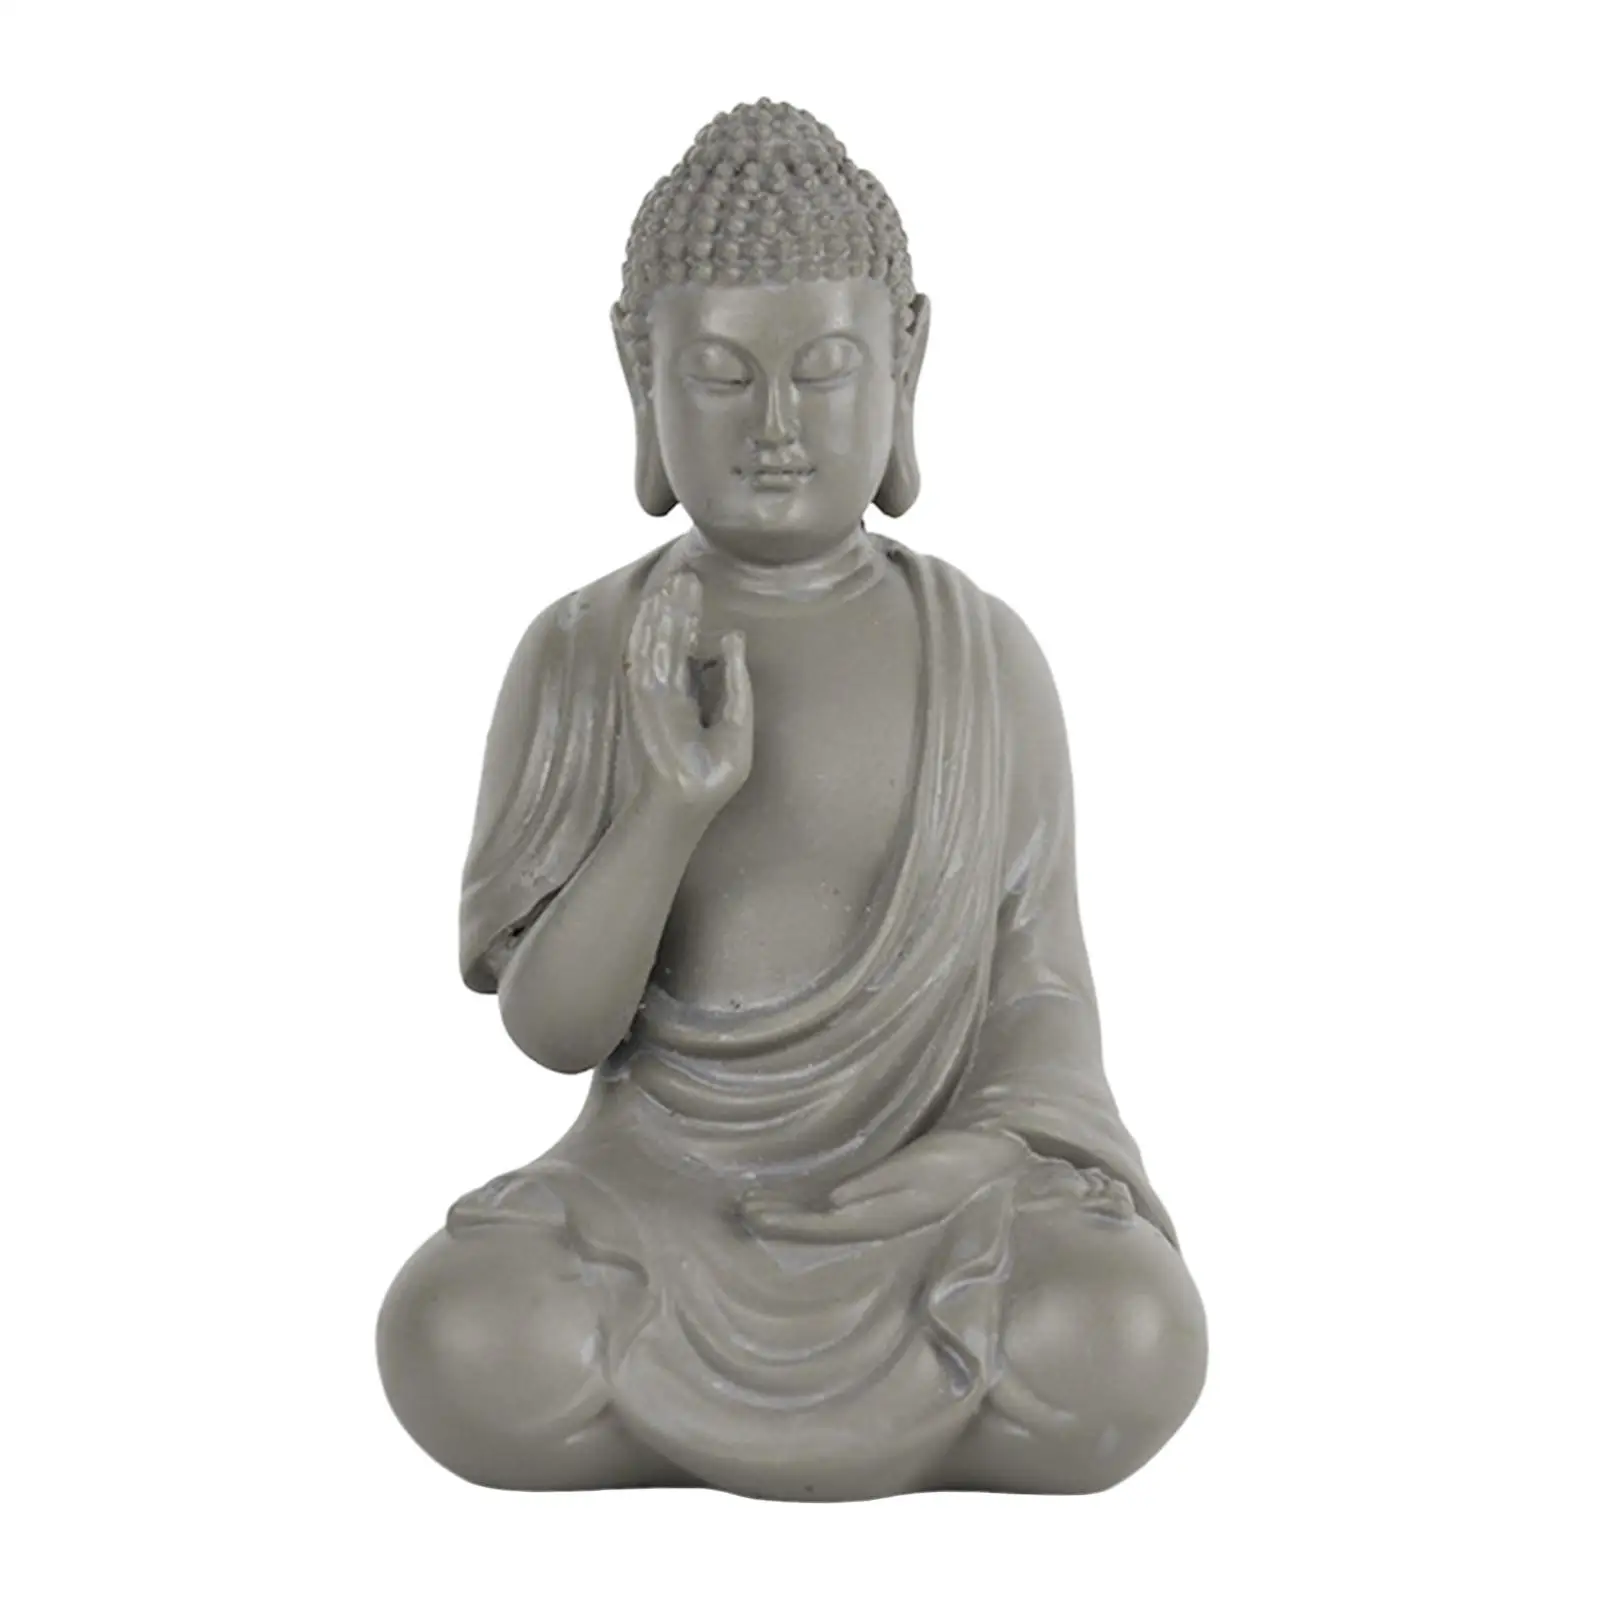 Buddha Resin Statue Meditating Figurines Sculpture Living Room Handcrafted Collectible Sculpture for Office Shop Hotel Lawn Deck